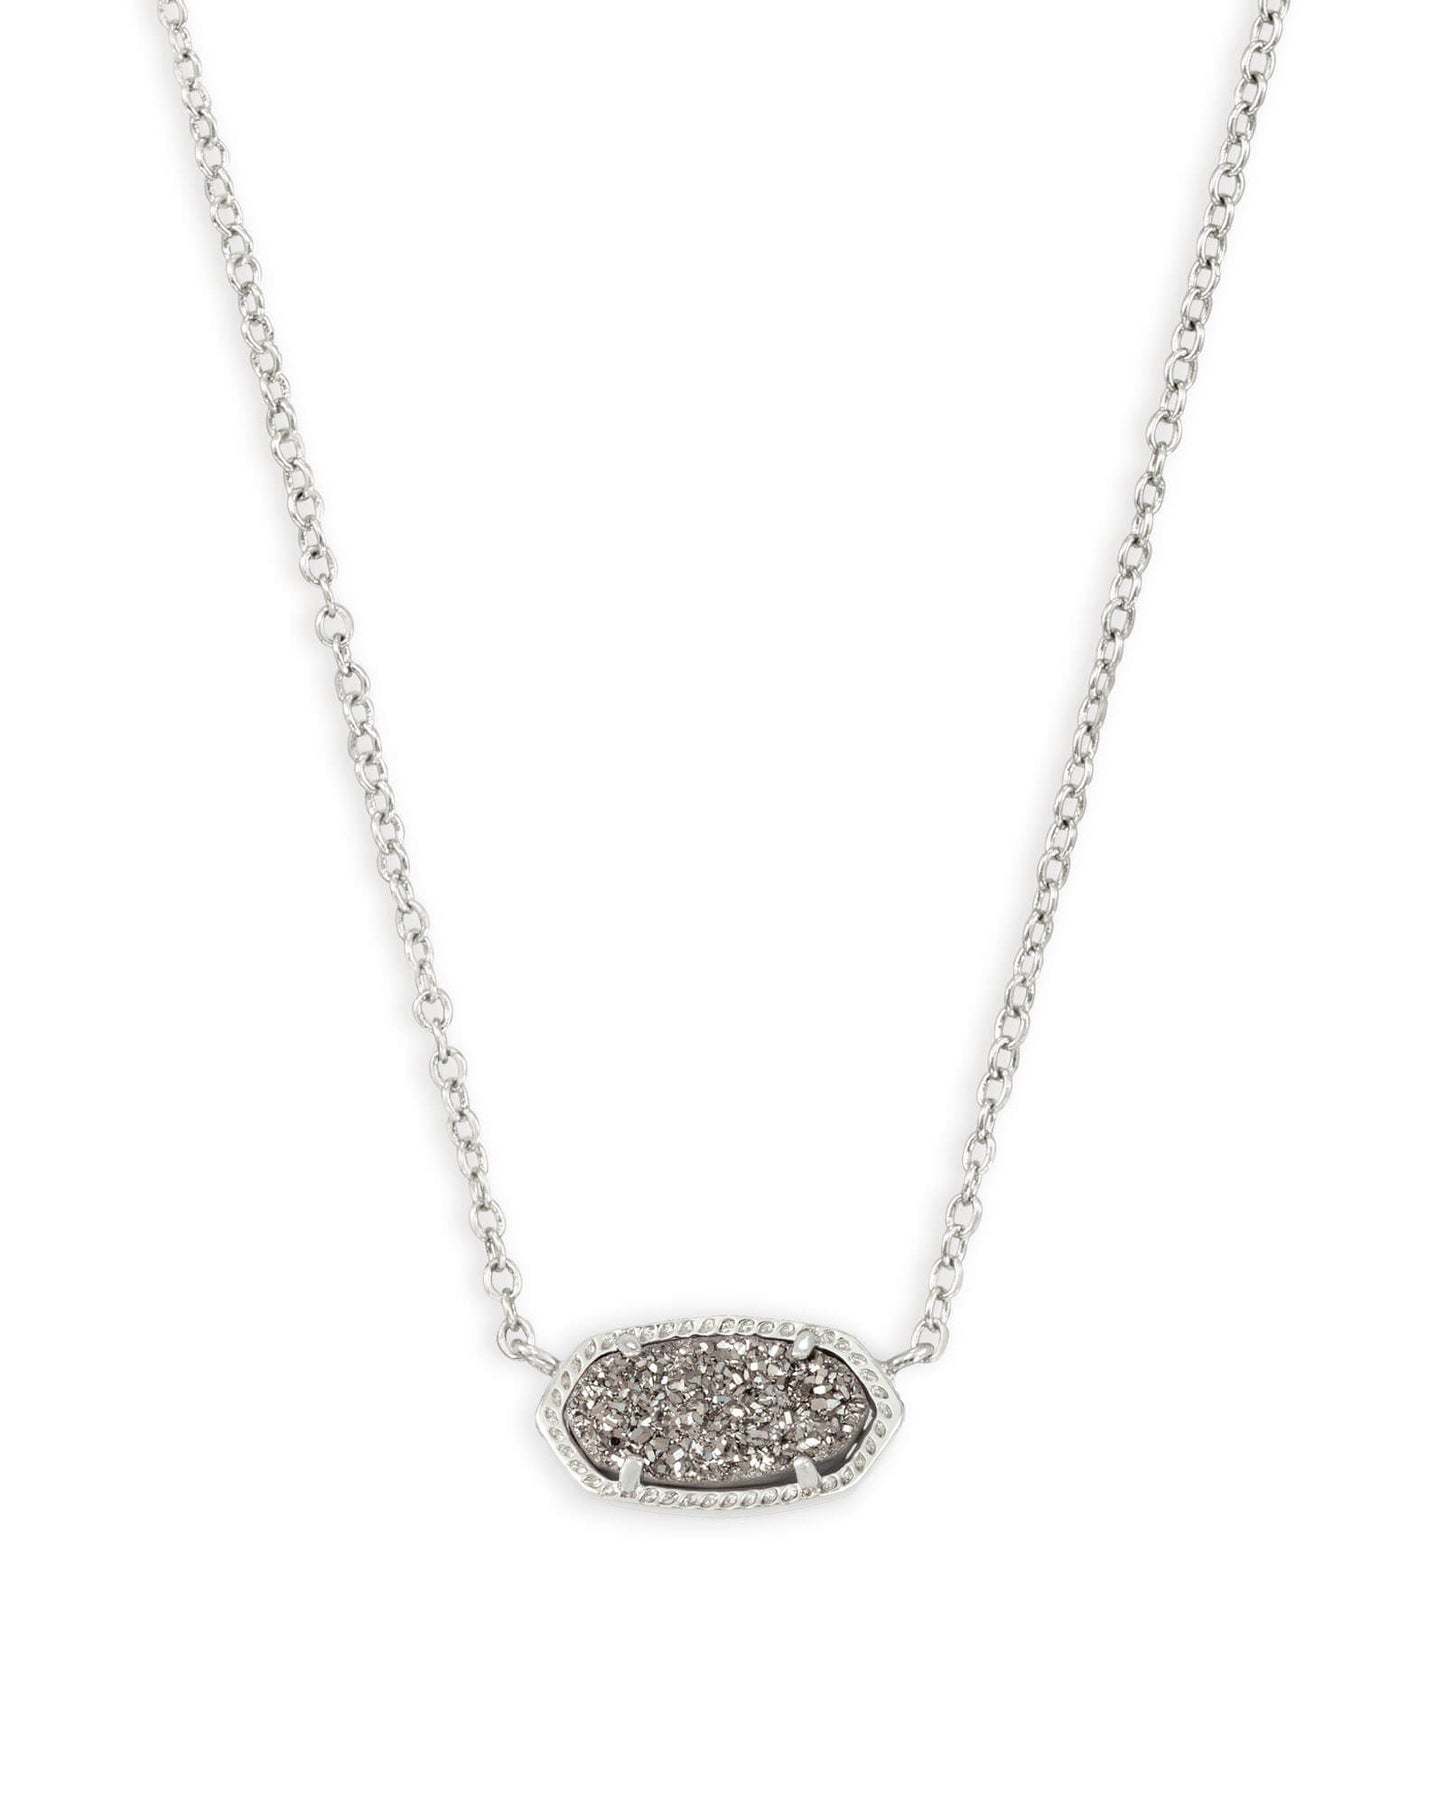 Load image into Gallery viewer, Kendra Scott, ELISA NECKLACE, 4217711238, N5067RHD, 0.63&amp;#39;L x 0.38&amp;#39;W stationary pendant, 15&amp;#39; chain with 2&amp;#39; extender, RHODIUM PLATINUM DRUSY
